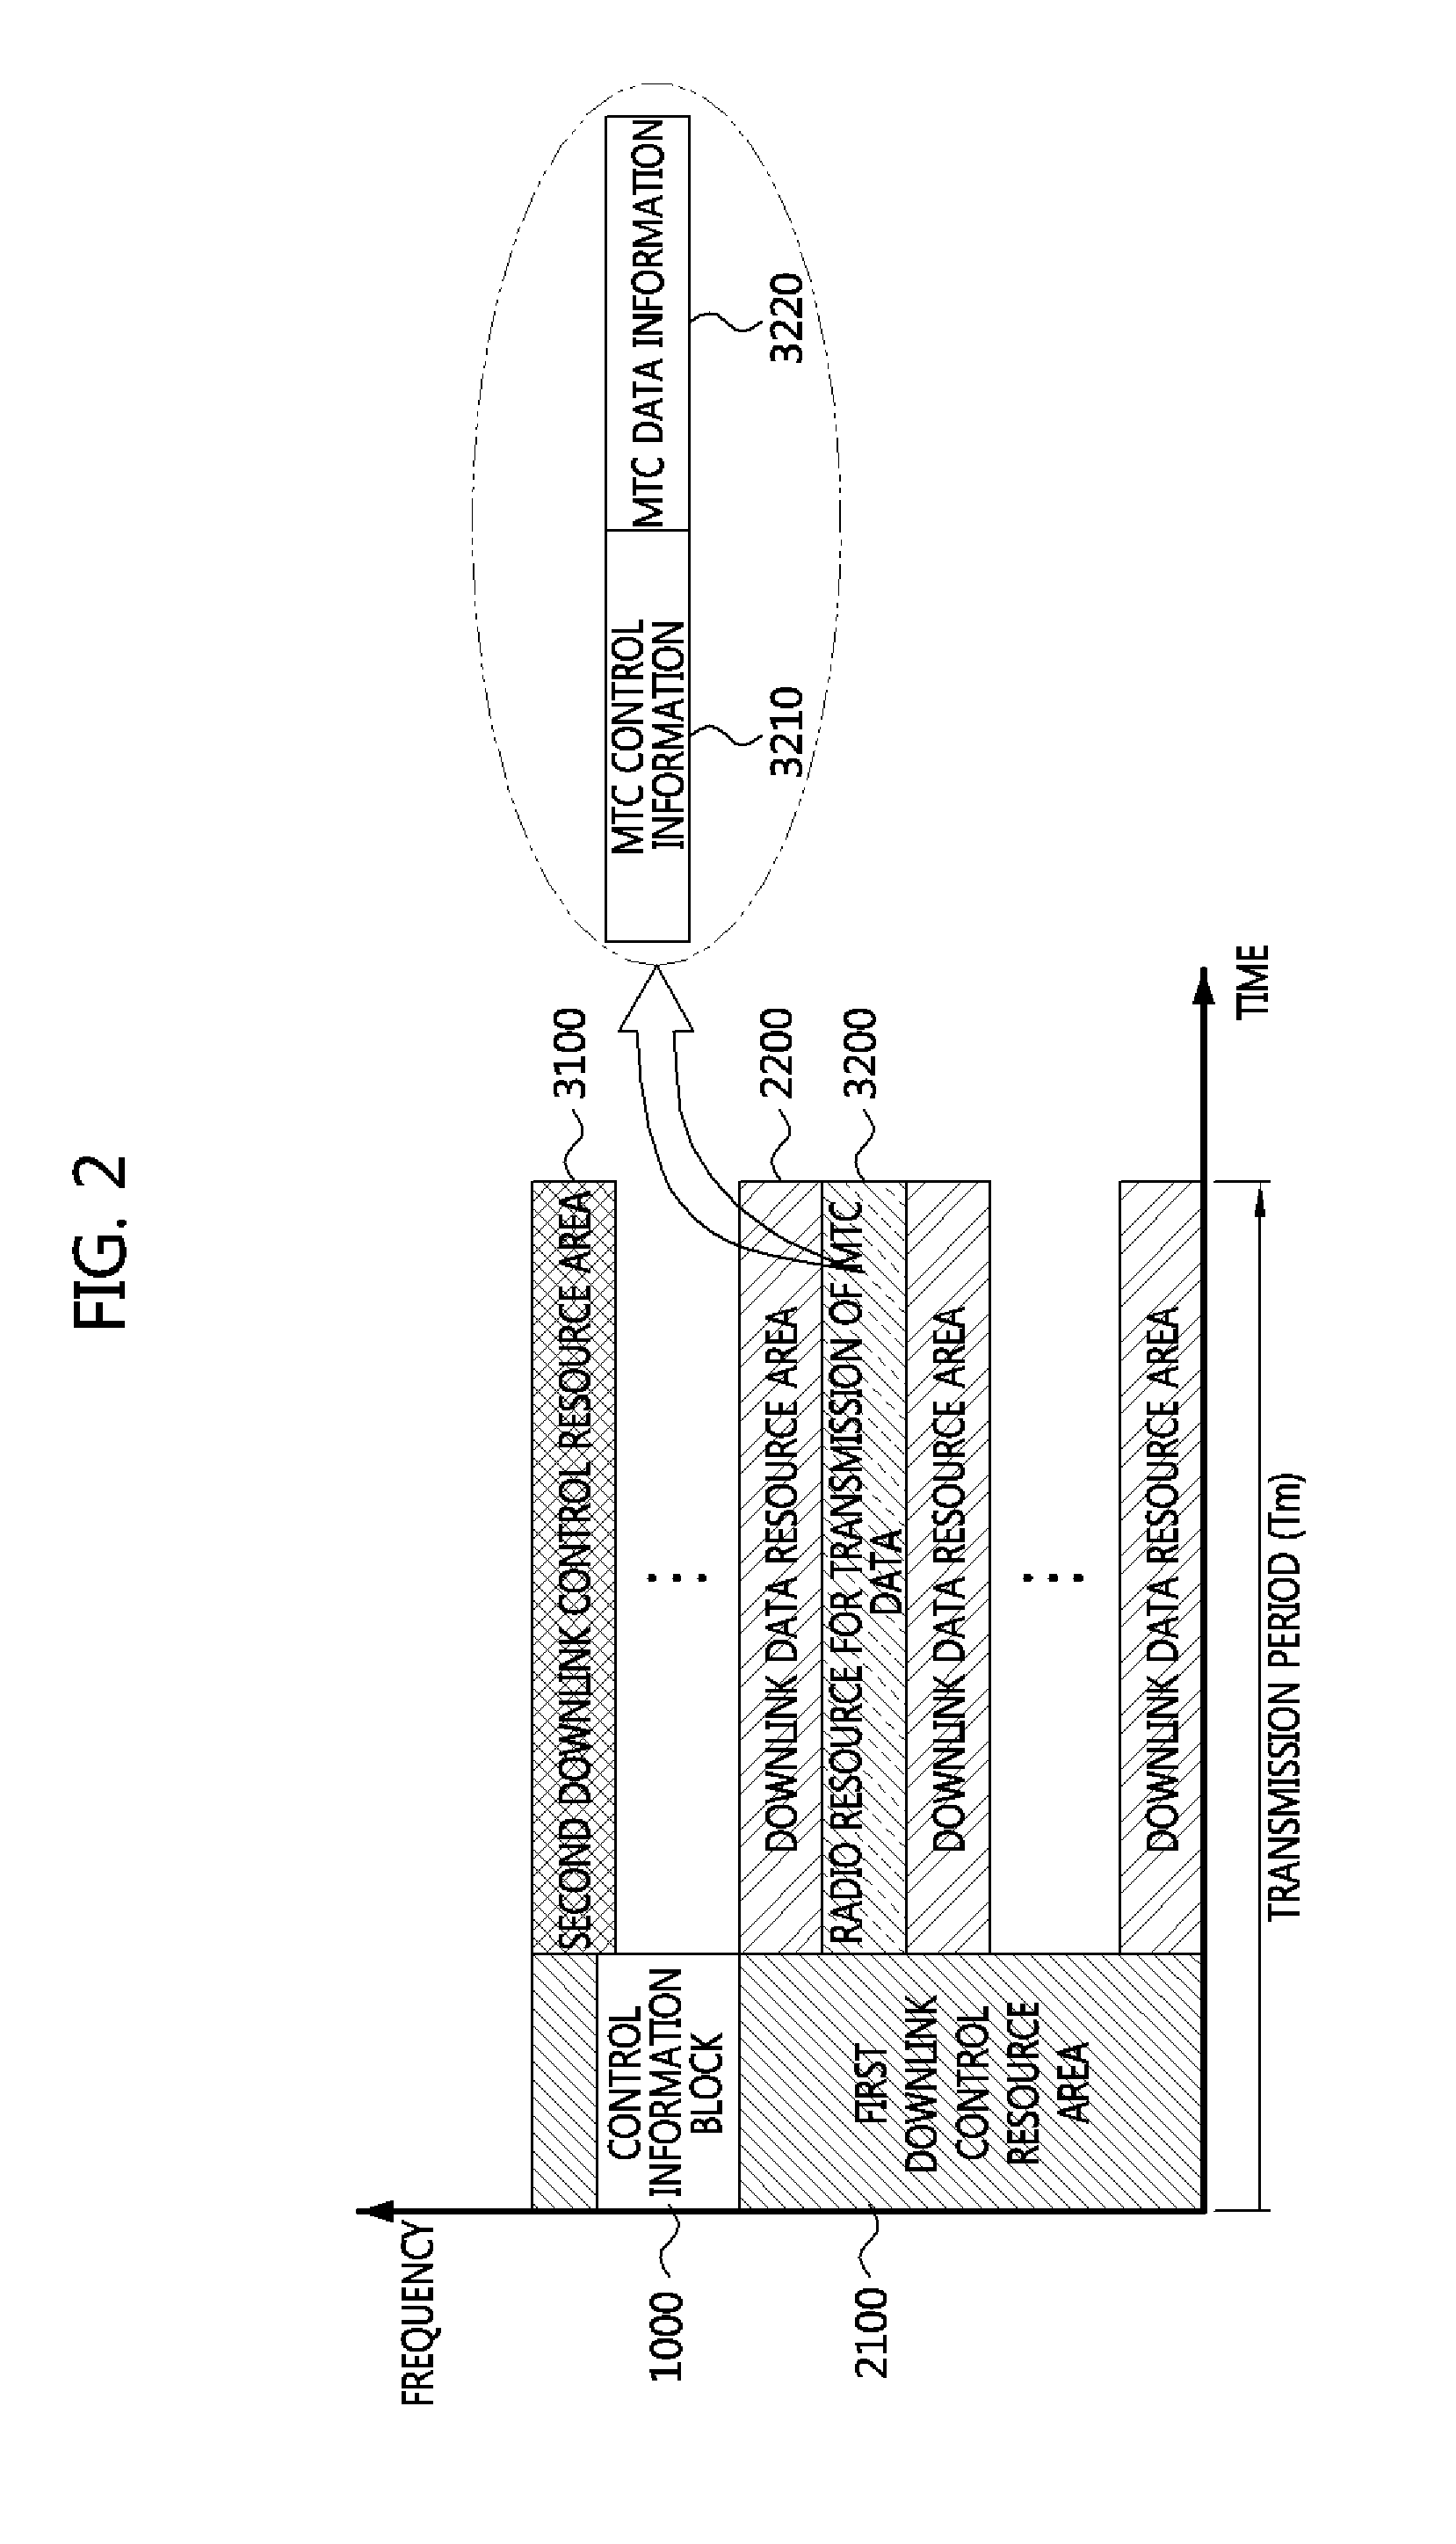 Resource allocating apparatus and method for machine type communication